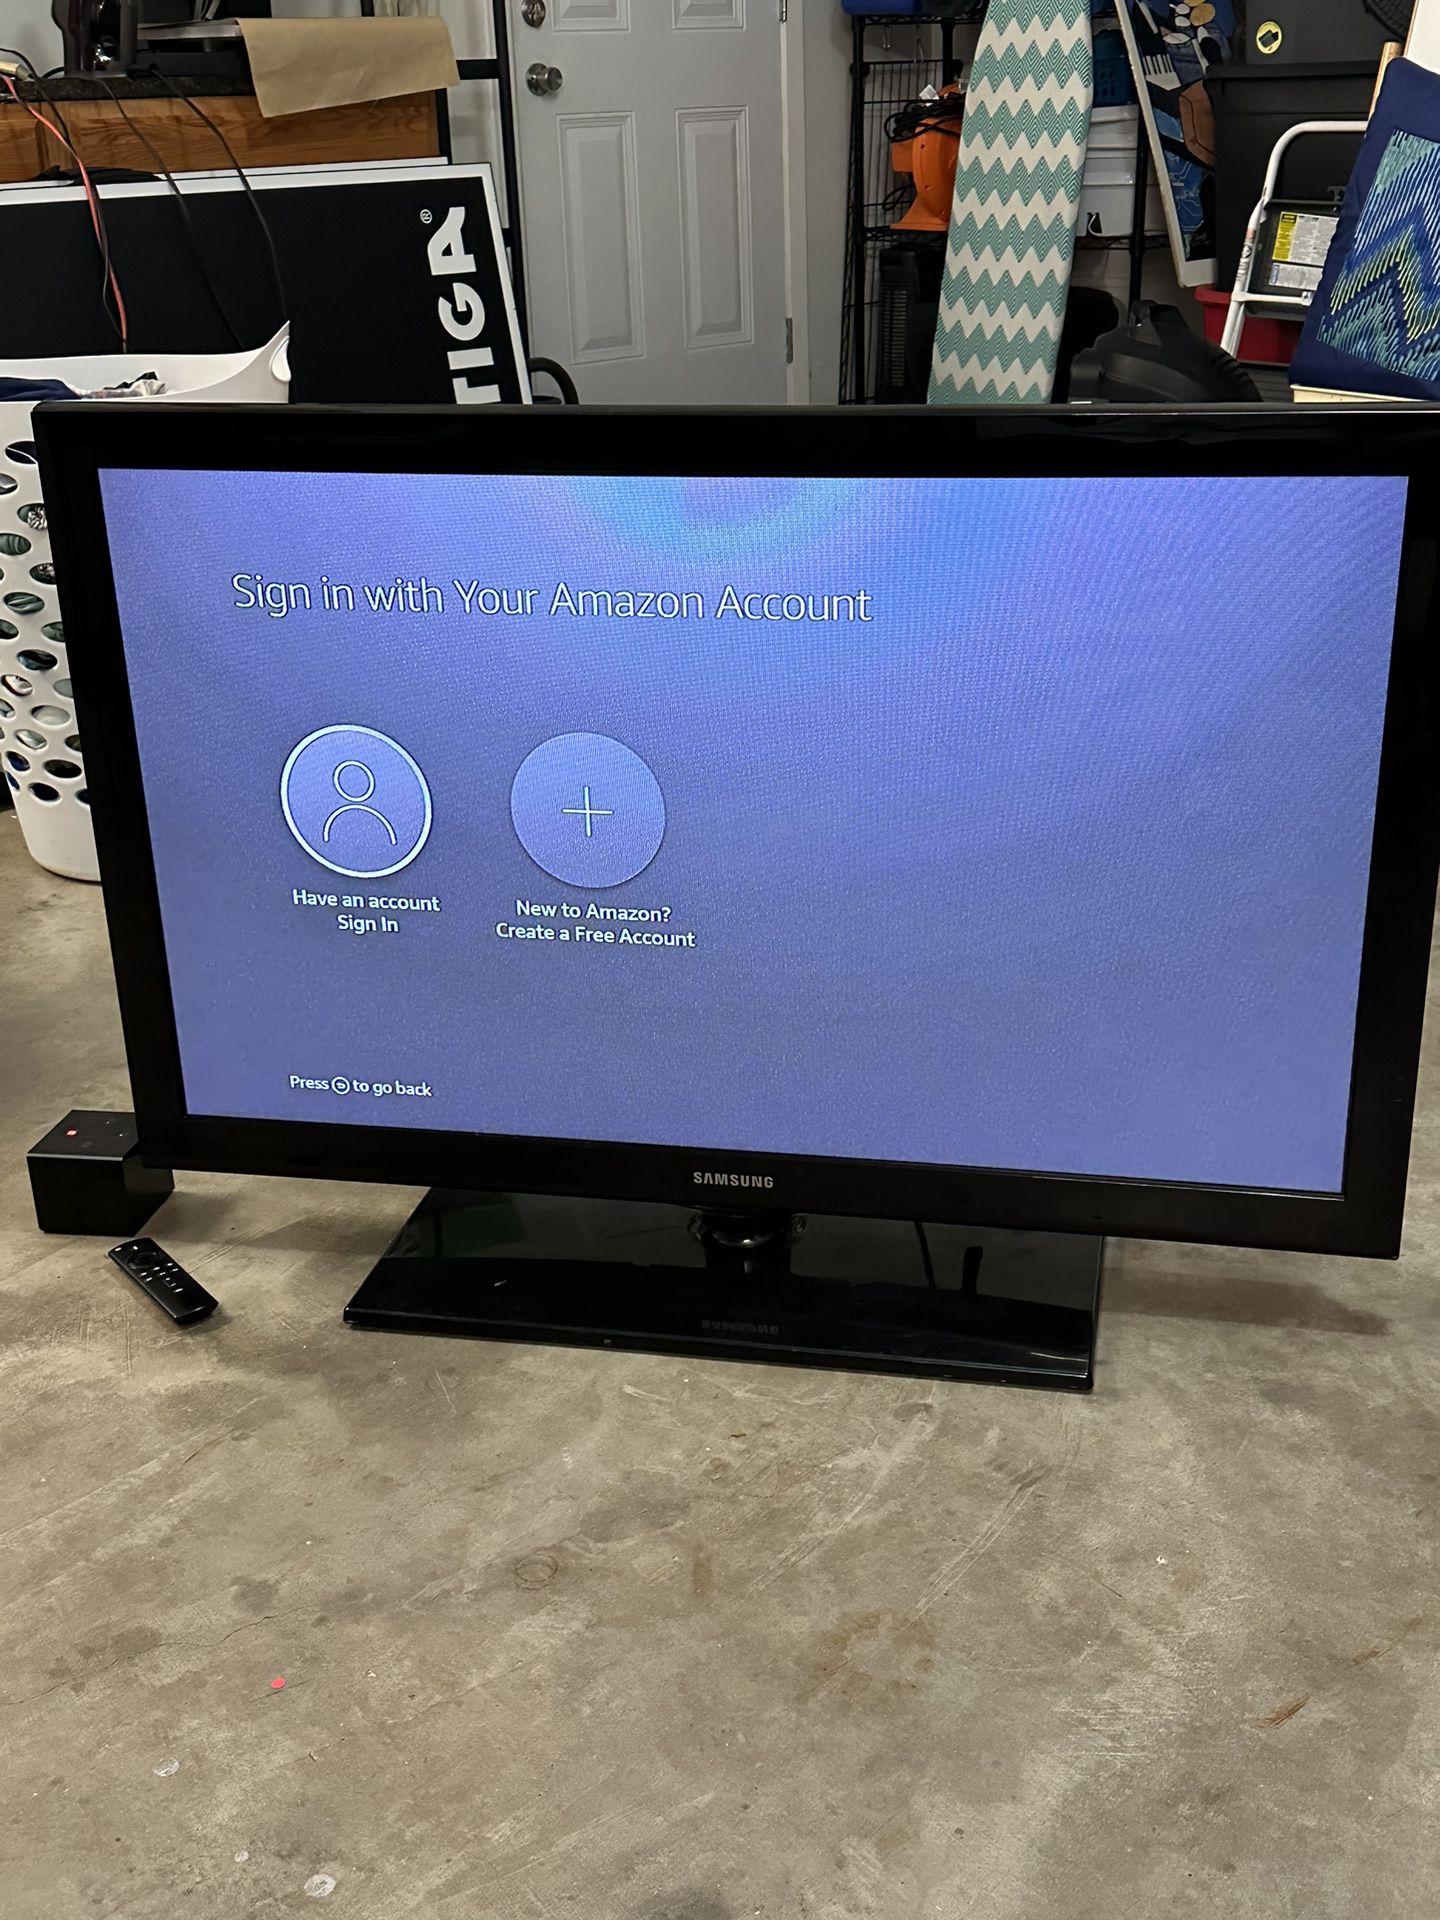 42 Inch Samsung Tv With Fire Cube